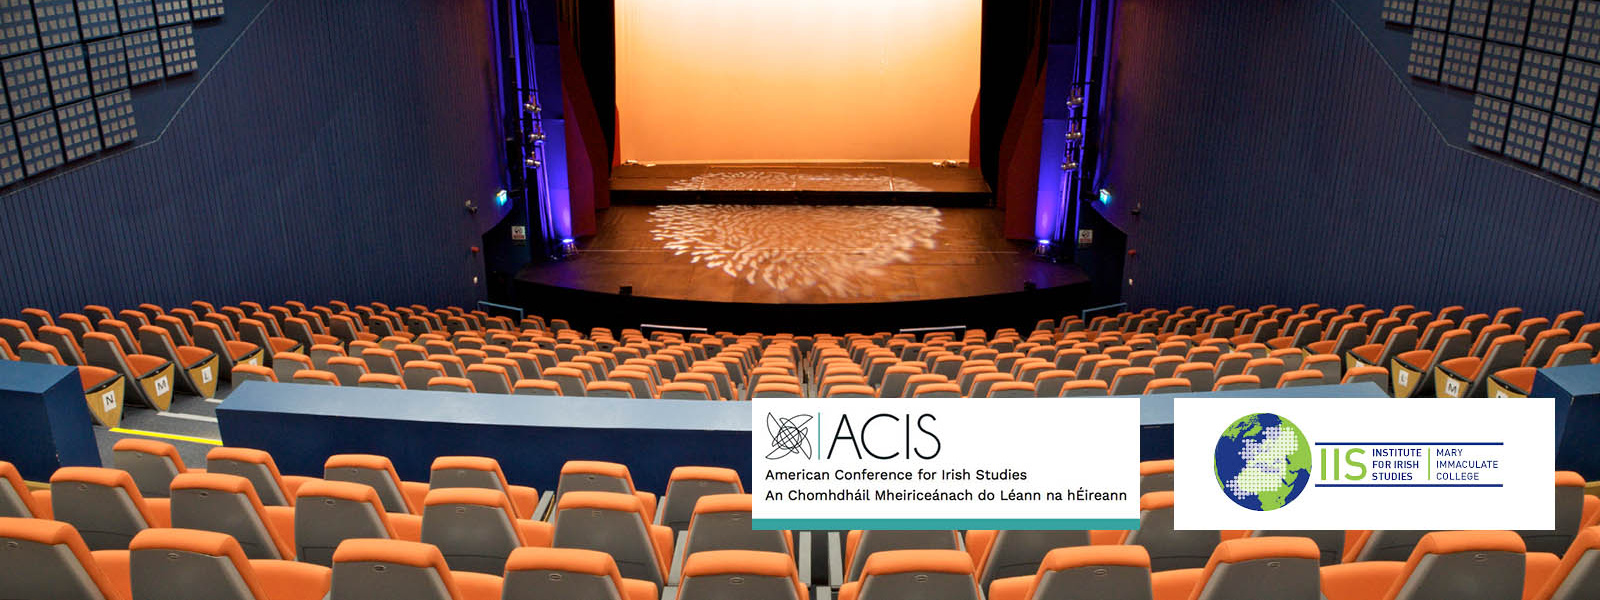 Lime Tree Theatre interior, MIC with ACIS and IIS logos overlaid.